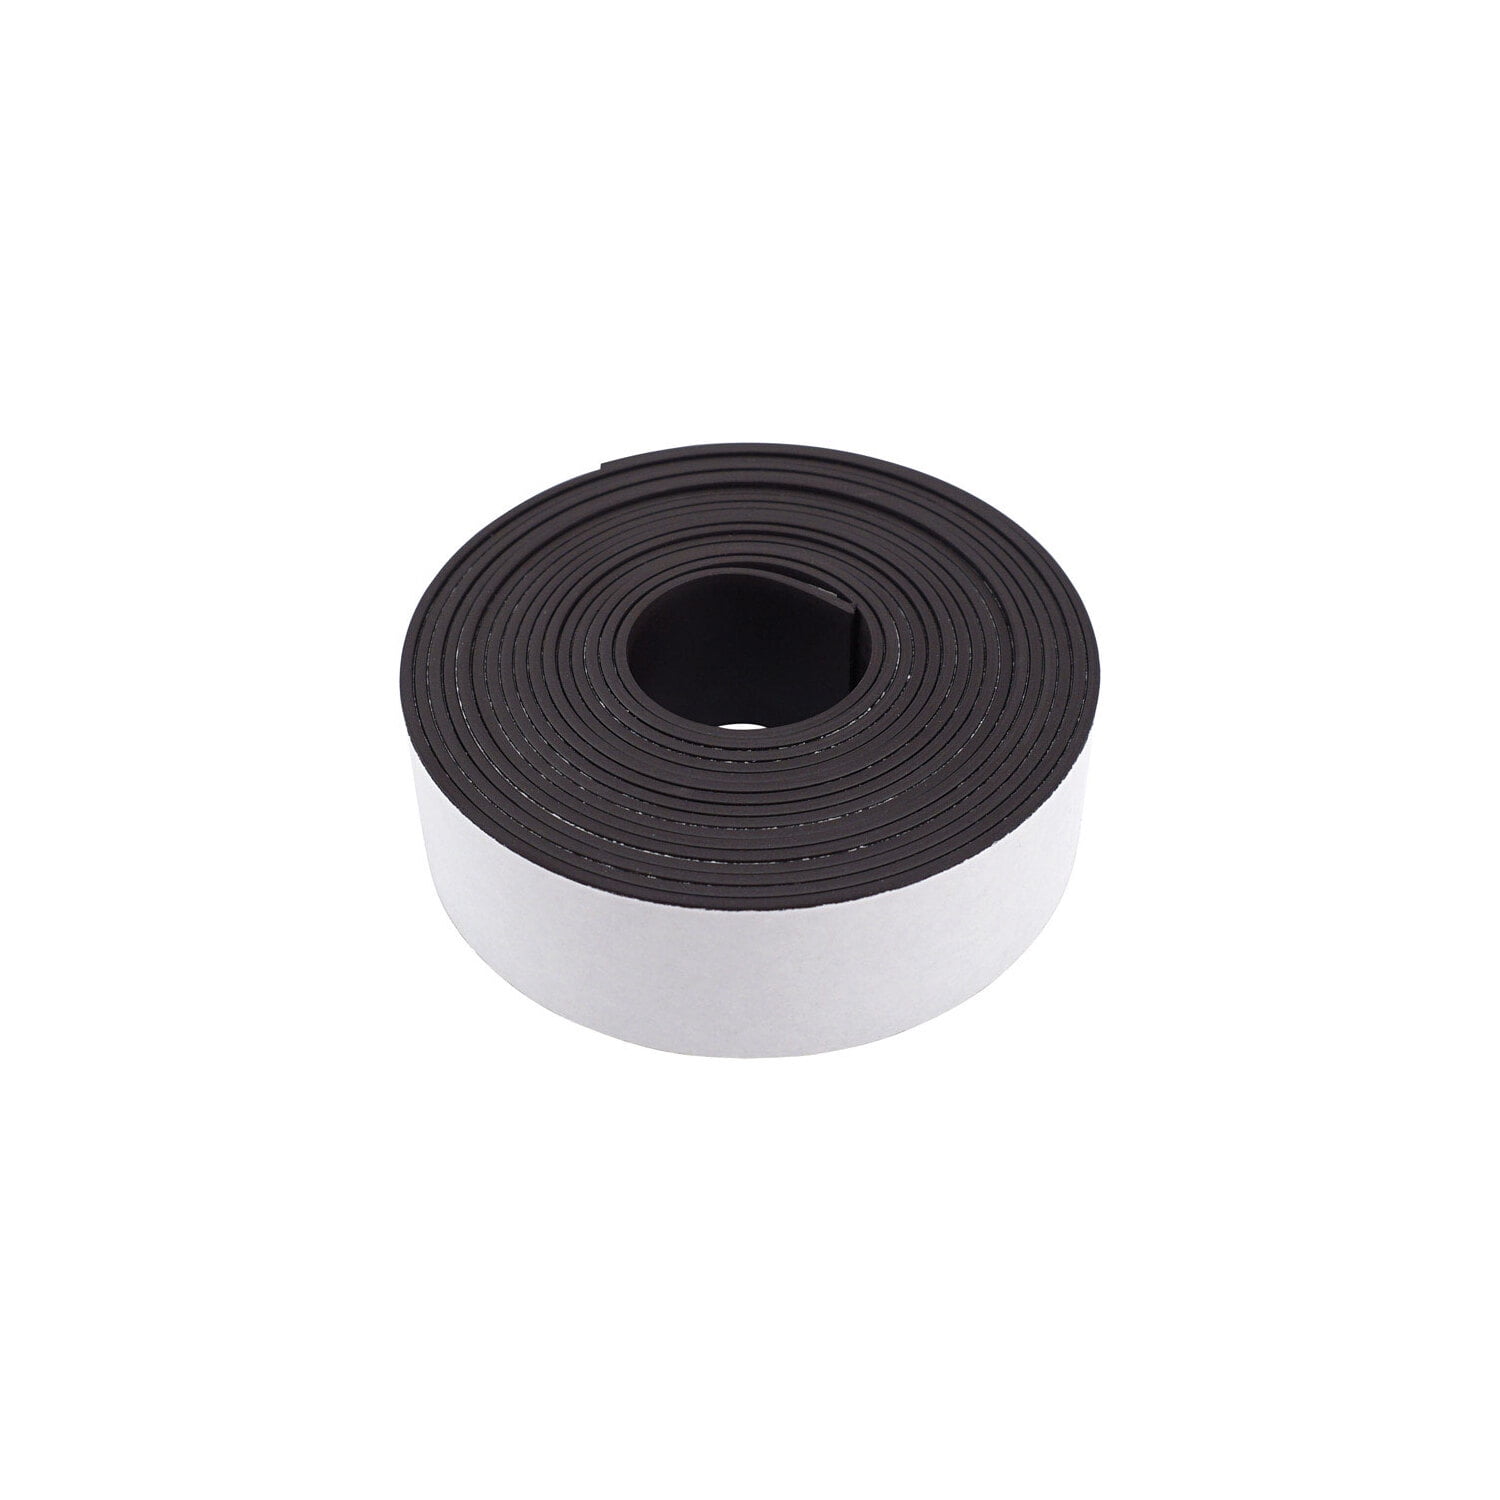 L Mounting Tape  Black Master Magnetics  The Magnet Source  .5 in W x 120 in